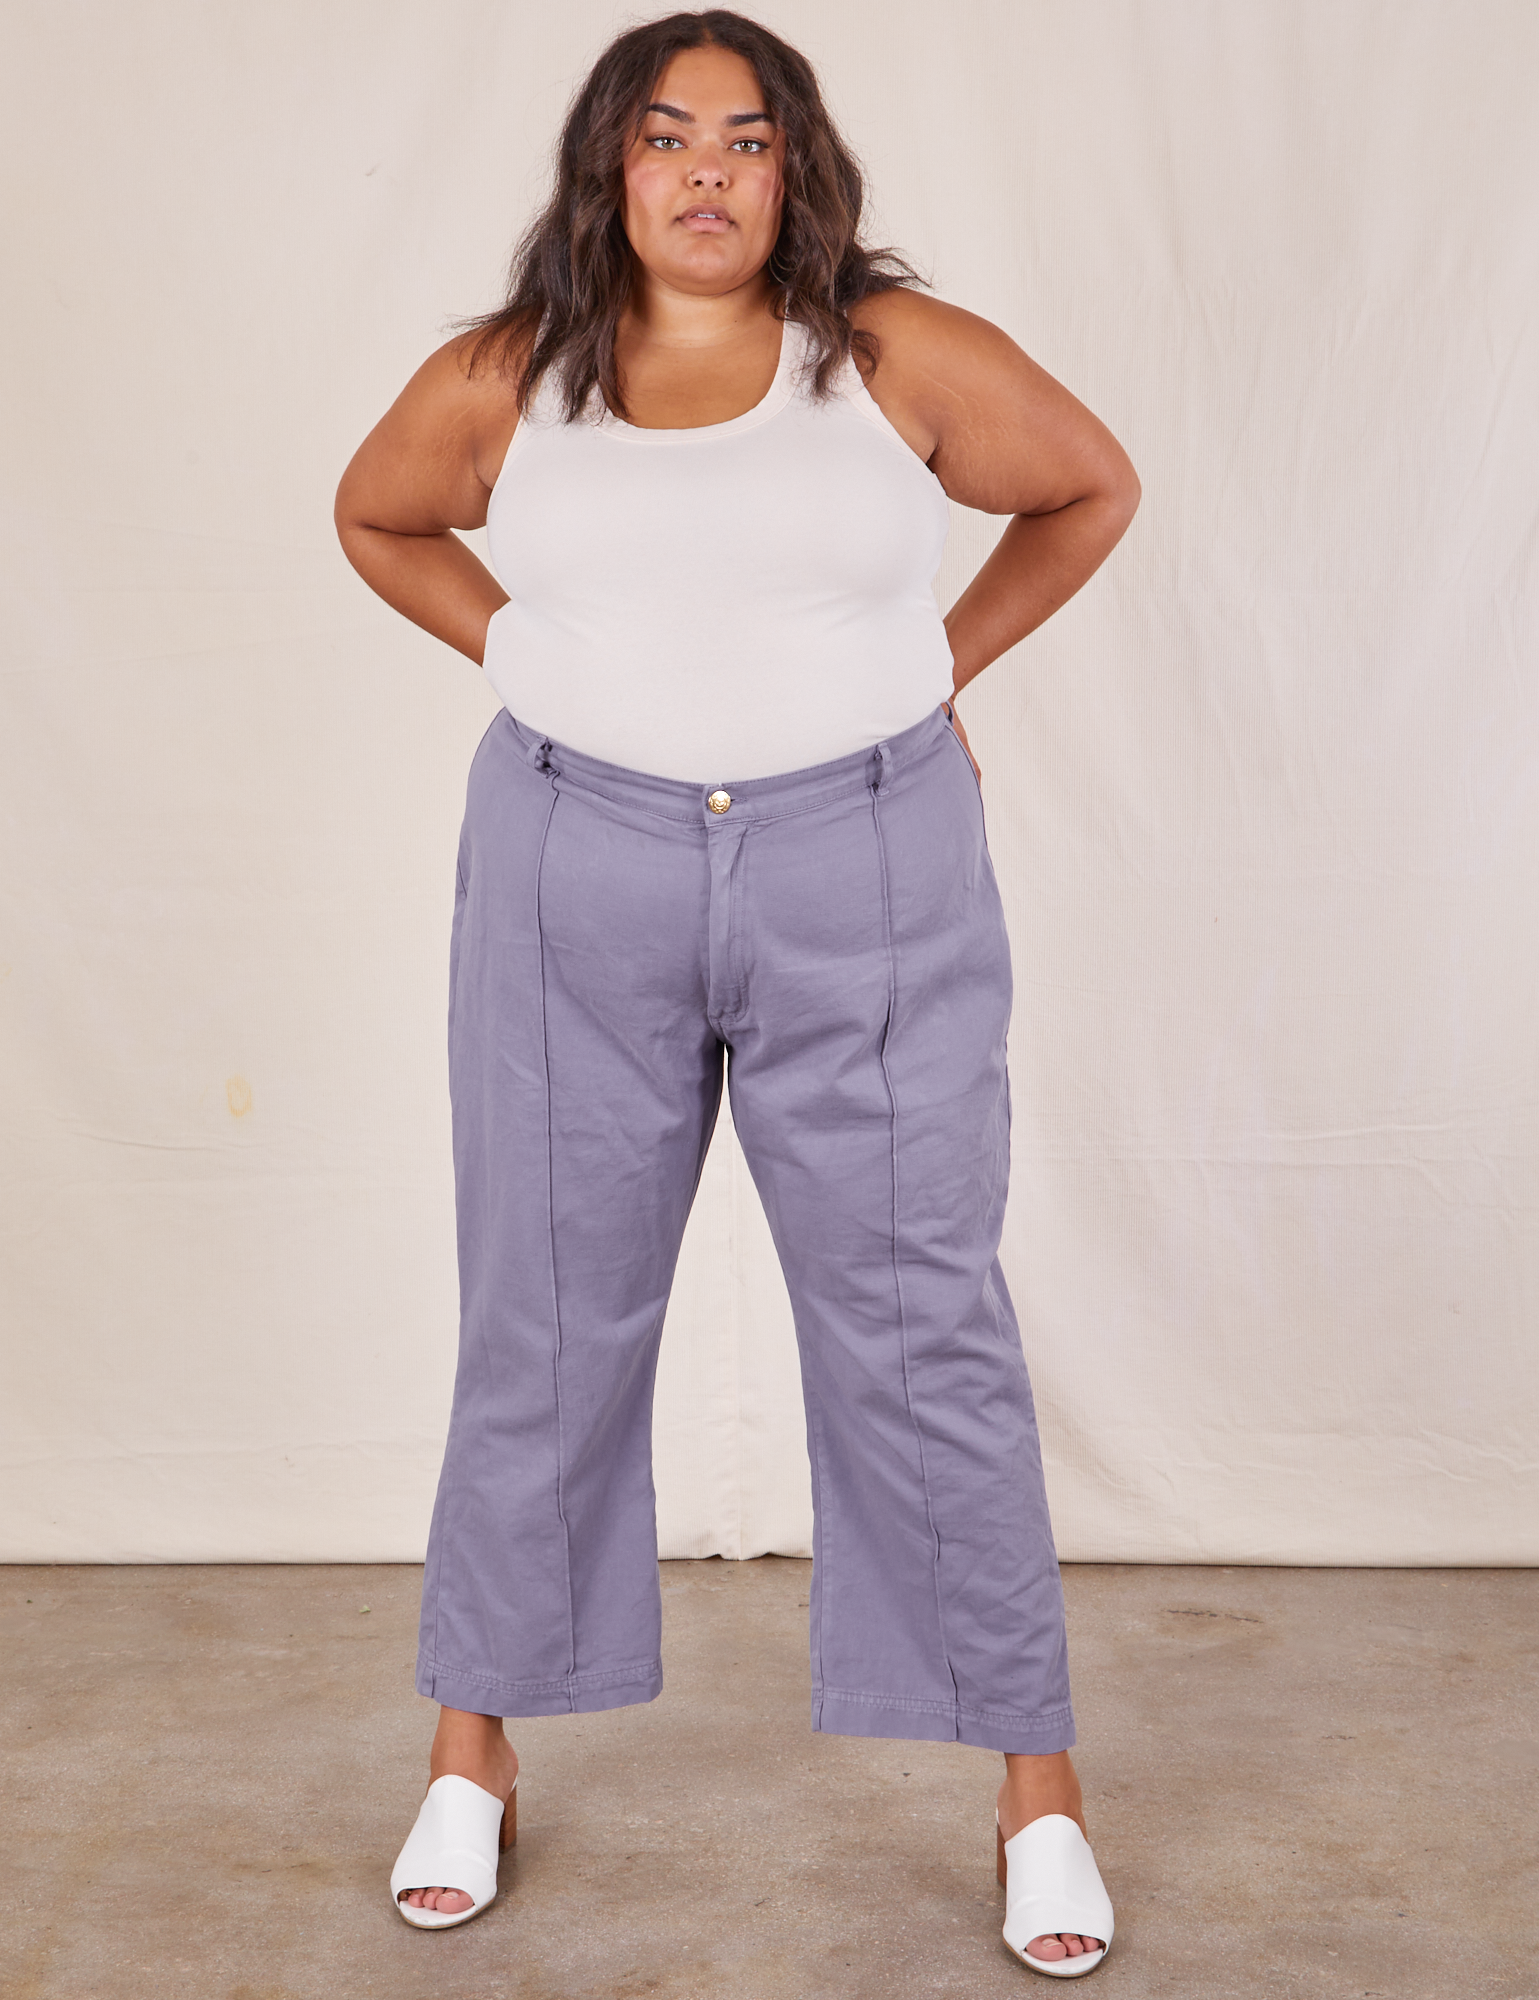 Alicia is 5&#39;9&quot; and wearing 2XL Western Pants in Faded Grape paired with a Tank Top in vintage tee off-white